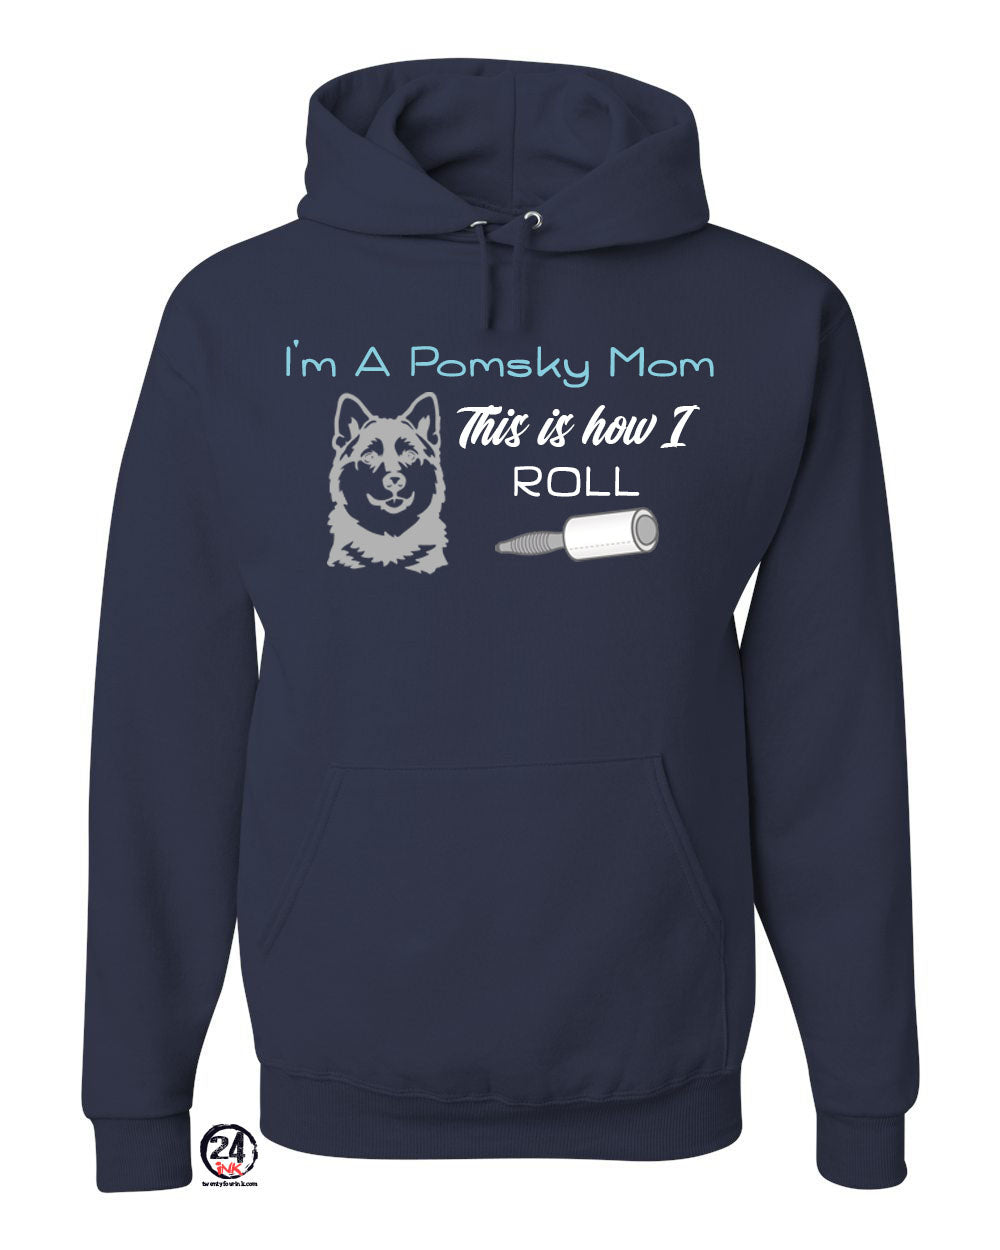 This is how I roll Hooded Sweatshirt